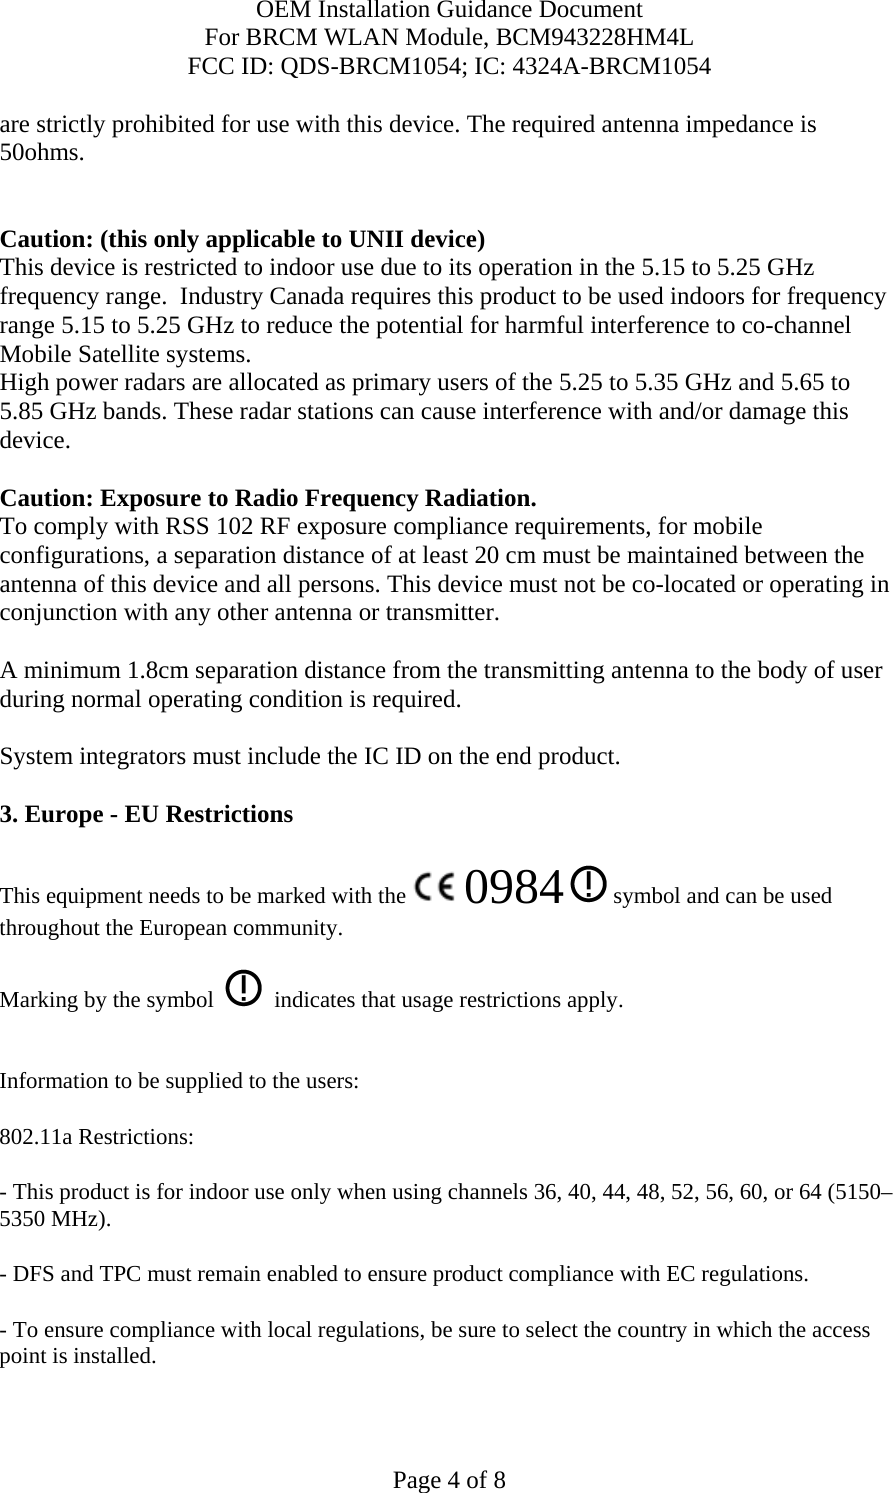 OEM Installation Guidance Document For BRCM WLAN Module, BCM943228HM4L FCC ID: QDS-BRCM1054; IC: 4324A-BRCM1054  Page 4 of 8 are strictly prohibited for use with this device. The required antenna impedance is 50ohms.   Caution: (this only applicable to UNII device) This device is restricted to indoor use due to its operation in the 5.15 to 5.25 GHz frequency range.  Industry Canada requires this product to be used indoors for frequency range 5.15 to 5.25 GHz to reduce the potential for harmful interference to co-channel Mobile Satellite systems. High power radars are allocated as primary users of the 5.25 to 5.35 GHz and 5.65 to 5.85 GHz bands. These radar stations can cause interference with and/or damage this device.  Caution: Exposure to Radio Frequency Radiation. To comply with RSS 102 RF exposure compliance requirements, for mobile configurations, a separation distance of at least 20 cm must be maintained between the antenna of this device and all persons. This device must not be co-located or operating in conjunction with any other antenna or transmitter.  A minimum 1.8cm separation distance from the transmitting antenna to the body of user during normal operating condition is required.   System integrators must include the IC ID on the end product.   3. Europe - EU Restrictions This equipment needs to be marked with the   0984  symbol and can be used throughout the European community.  Marking by the symbol     indicates that usage restrictions apply.  Information to be supplied to the users: 802.11a Restrictions: - This product is for indoor use only when using channels 36, 40, 44, 48, 52, 56, 60, or 64 (5150–5350 MHz).       - DFS and TPC must remain enabled to ensure product compliance with EC regulations.      - To ensure compliance with local regulations, be sure to select the country in which the access point is installed. 